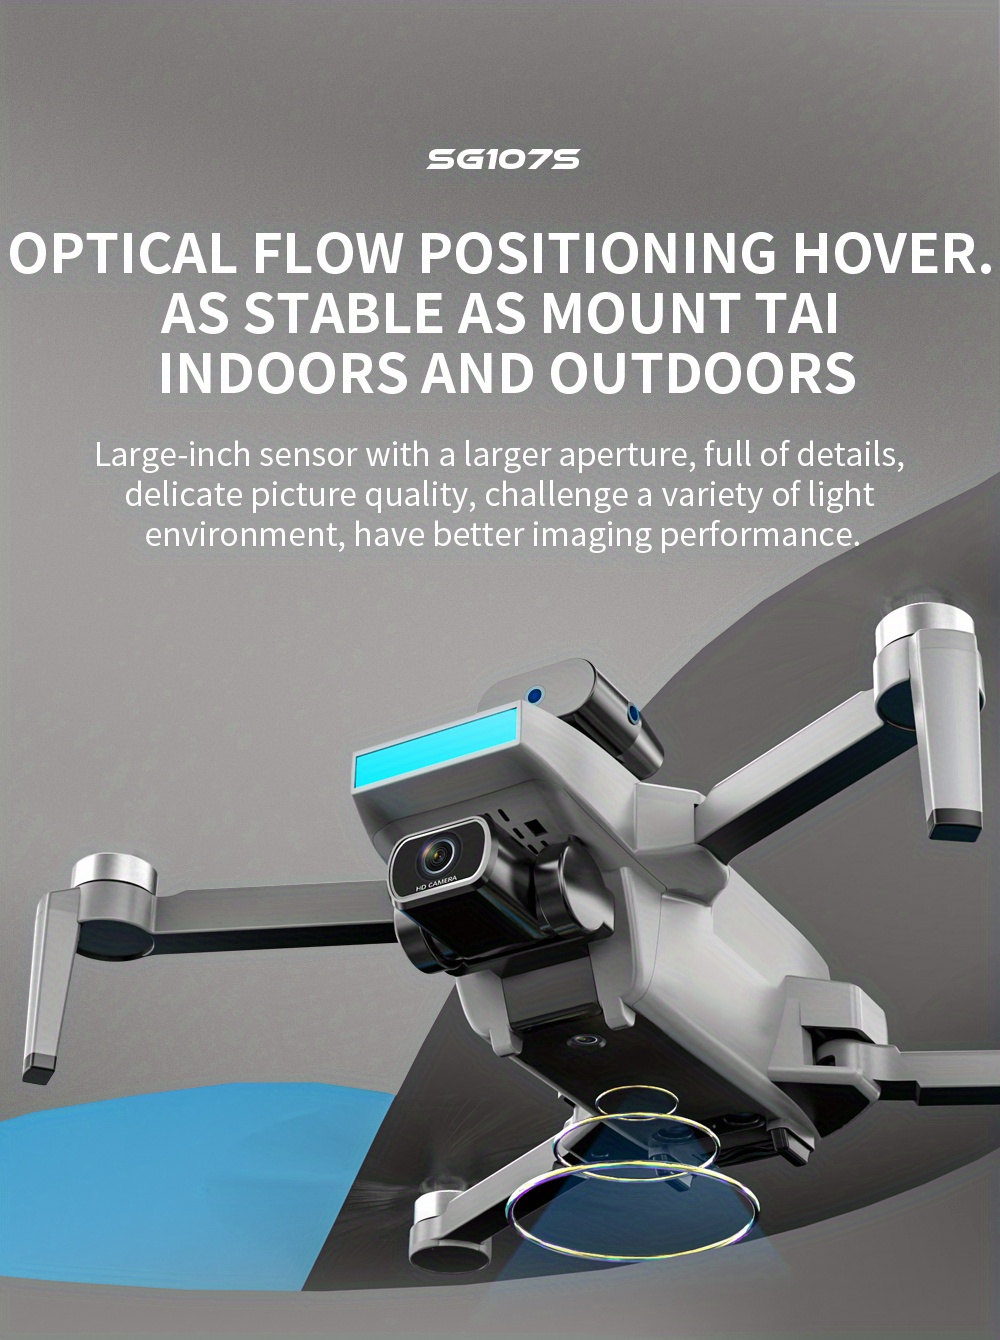 obstacle avoidance drone with dual high definition camera trajectory flight folding design optical flow position trajectory flight long lasting battery real time transmission carrying bag details 7